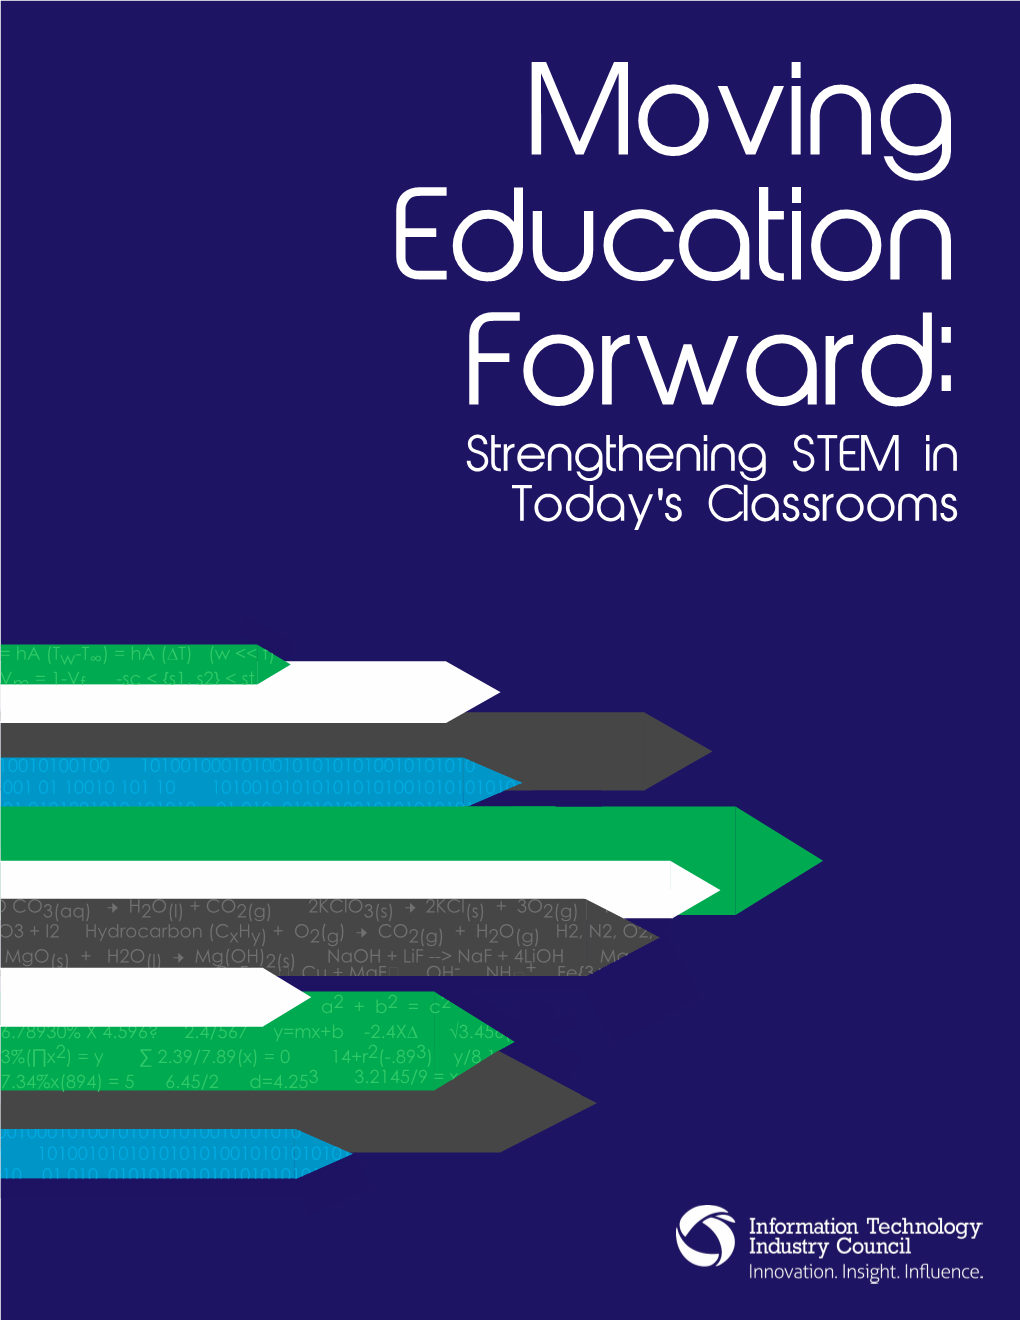 Moving Education Forward: Strengthening STEM in Today's Classrooms